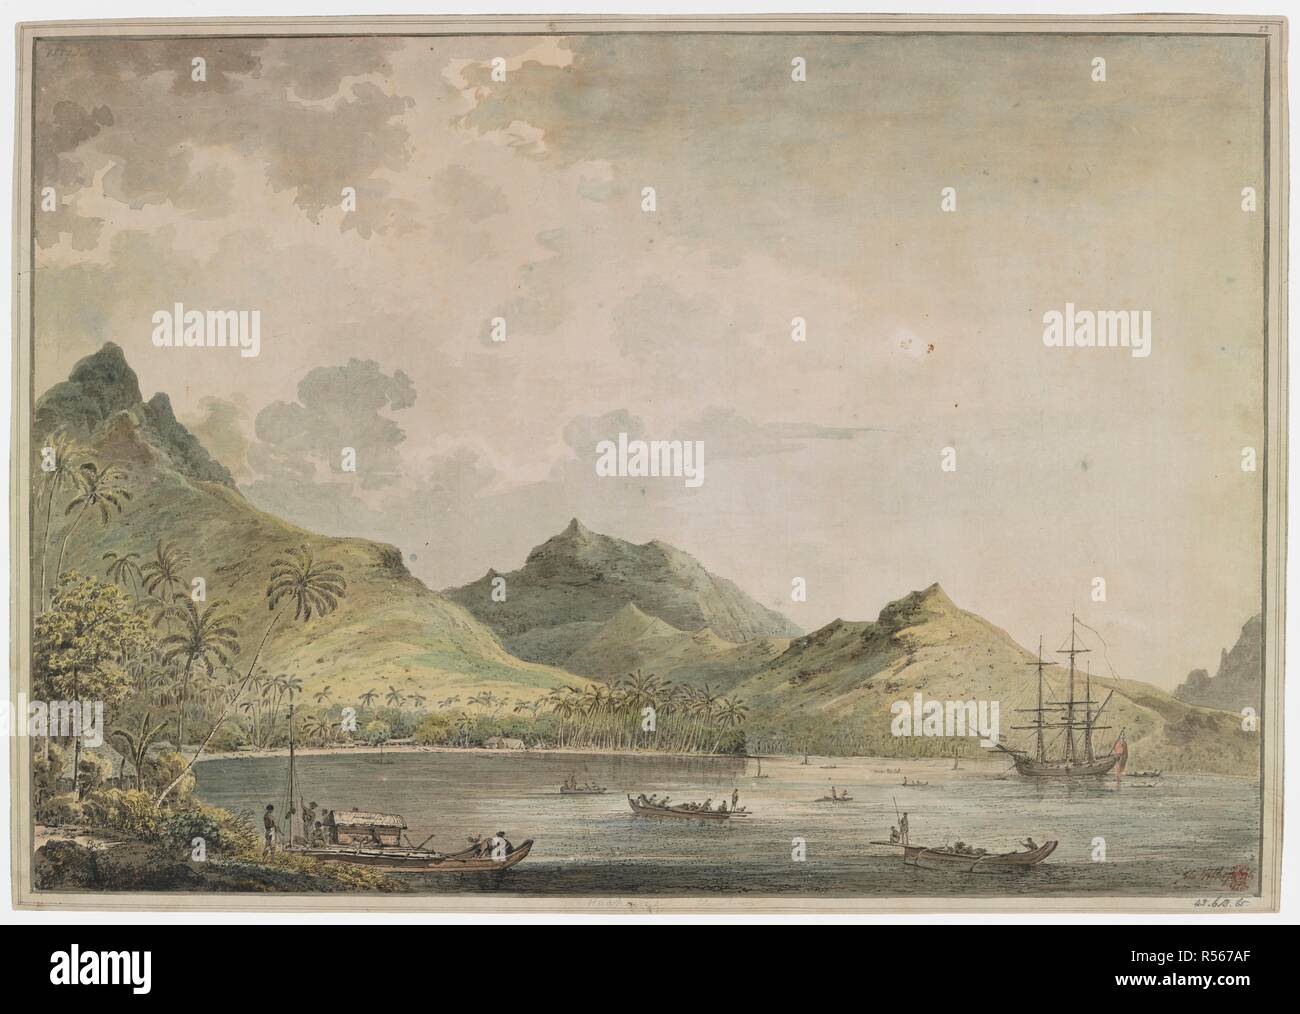 [Whole drawing]. A view of the harbour of Huahine [Fare Harbour]. with peaked mountains, including Mount Turi, in the background. In the bay is the 'Resolution' and many native craft, and on the shore a group of natives tend a double canoe with a deck-house. In the background and along the shore are native huts and English tents.  The view gives the location of Omai's settlement. Captain Cook had agreed with the chiefs for a place for Omai to settle. Carpenters from both ships built a small house for him, and other members of the crew made a garden, including planting vines and pineapples. Cap Stock Photo